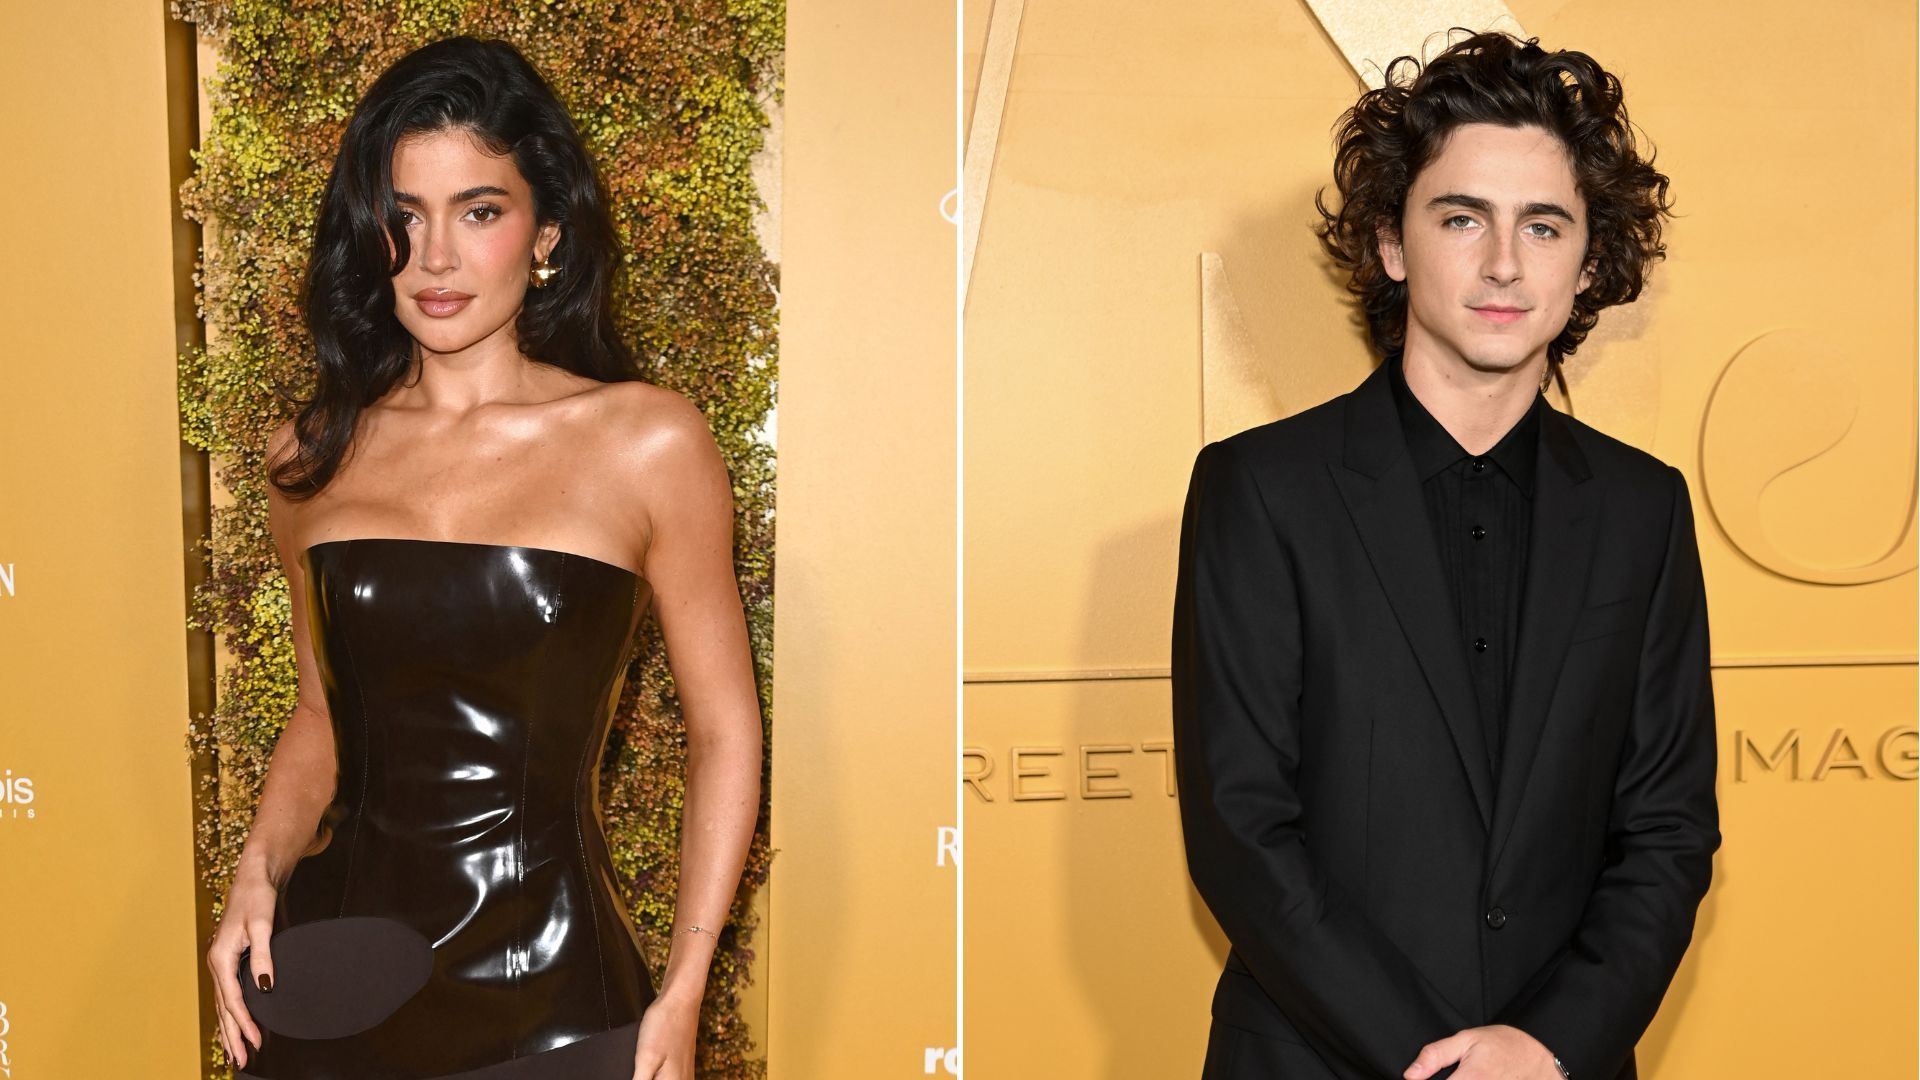 Kylie Jenner and Timothee Chalamet at the WSJ Awards
